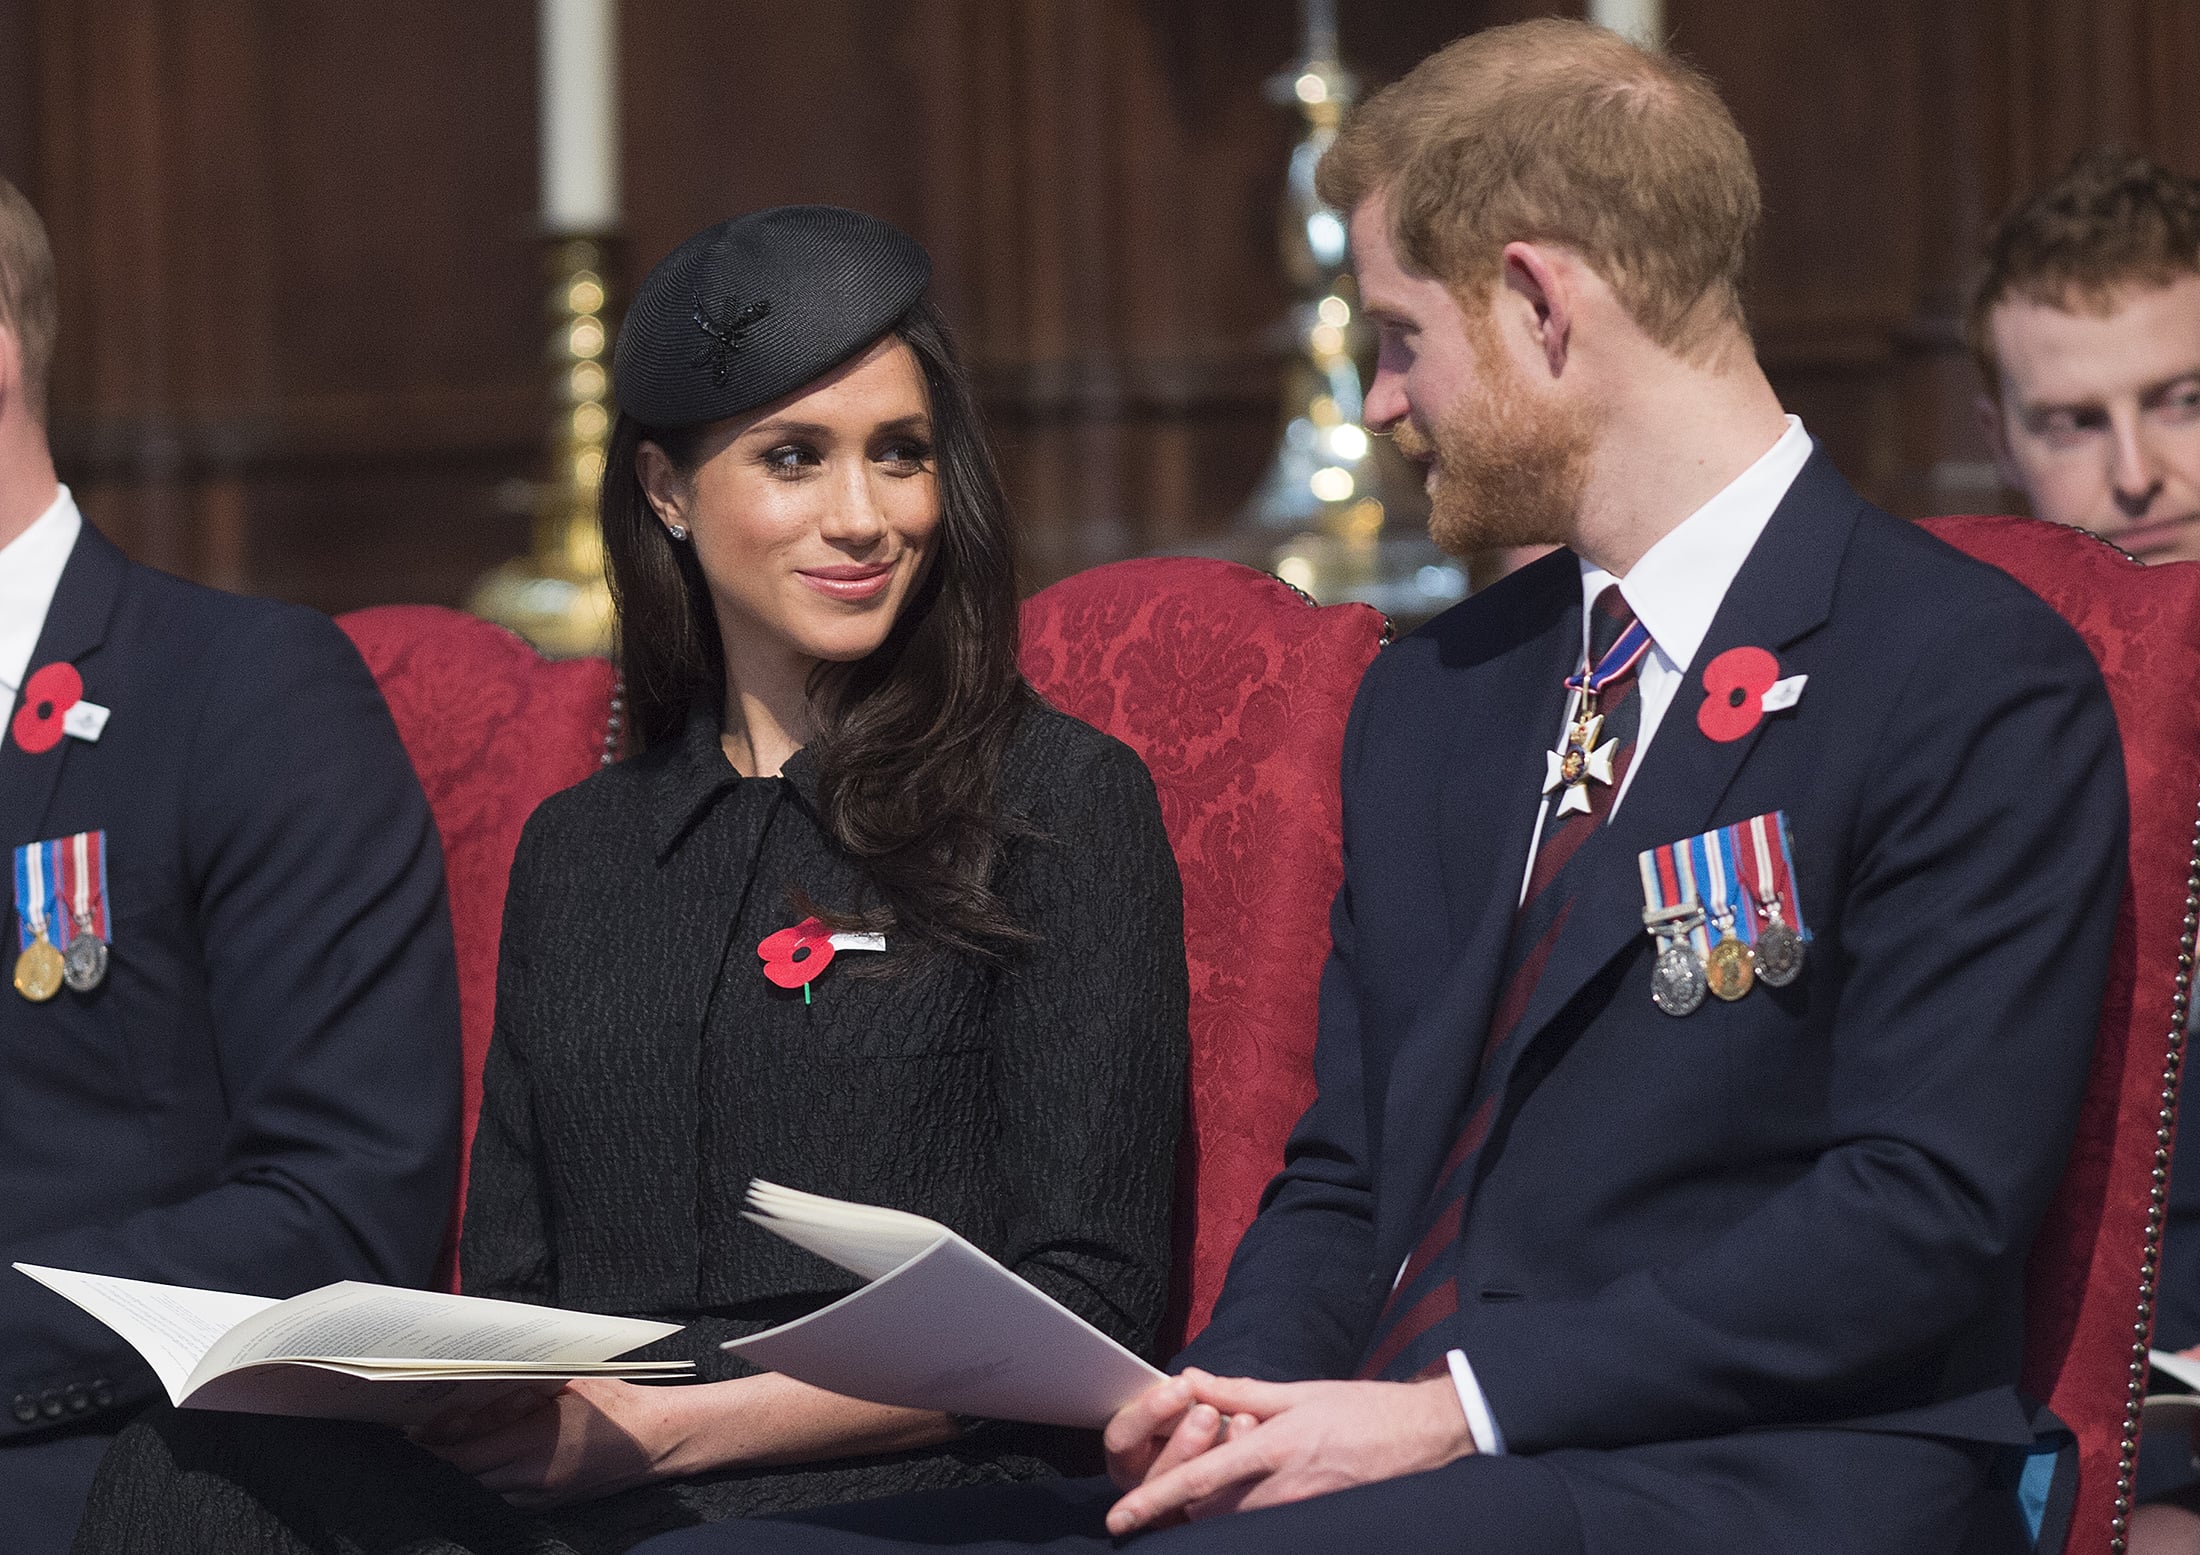 Why Does the Royal Family Wear Red Poppy Pins?